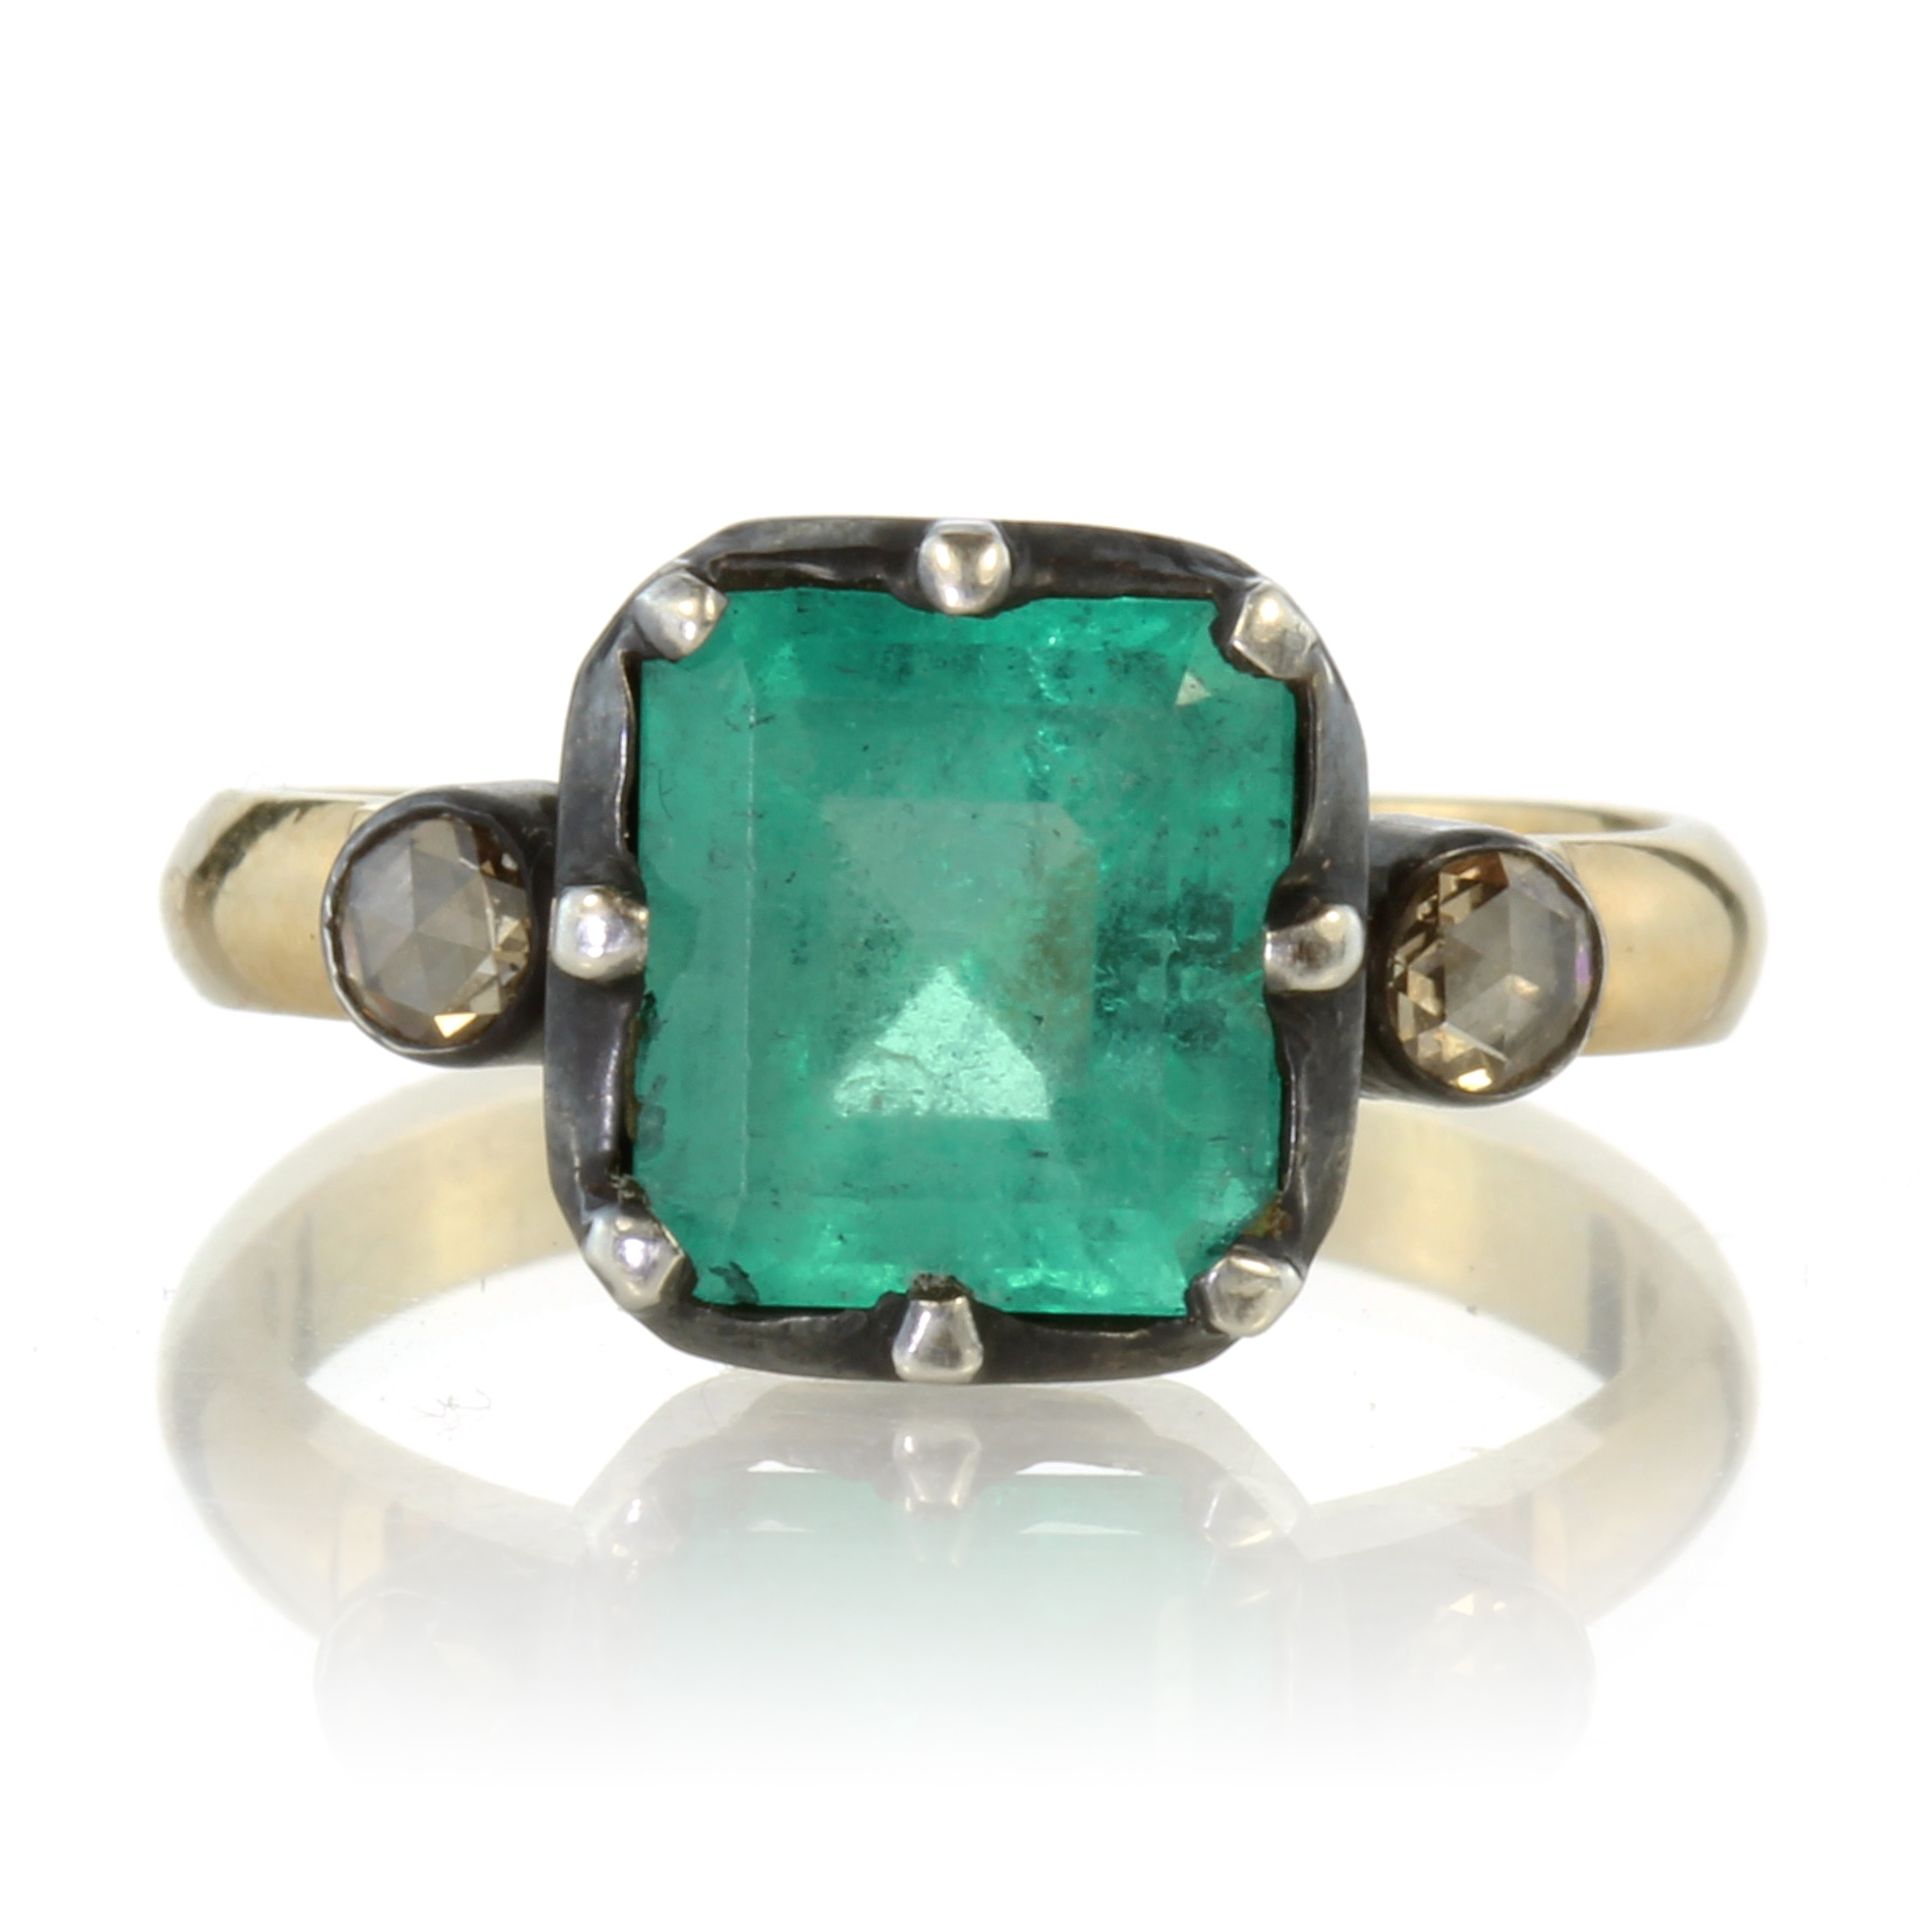 An emerald and diamond dress ring in 18ct yellow gold set with a central emerald cut emerald of